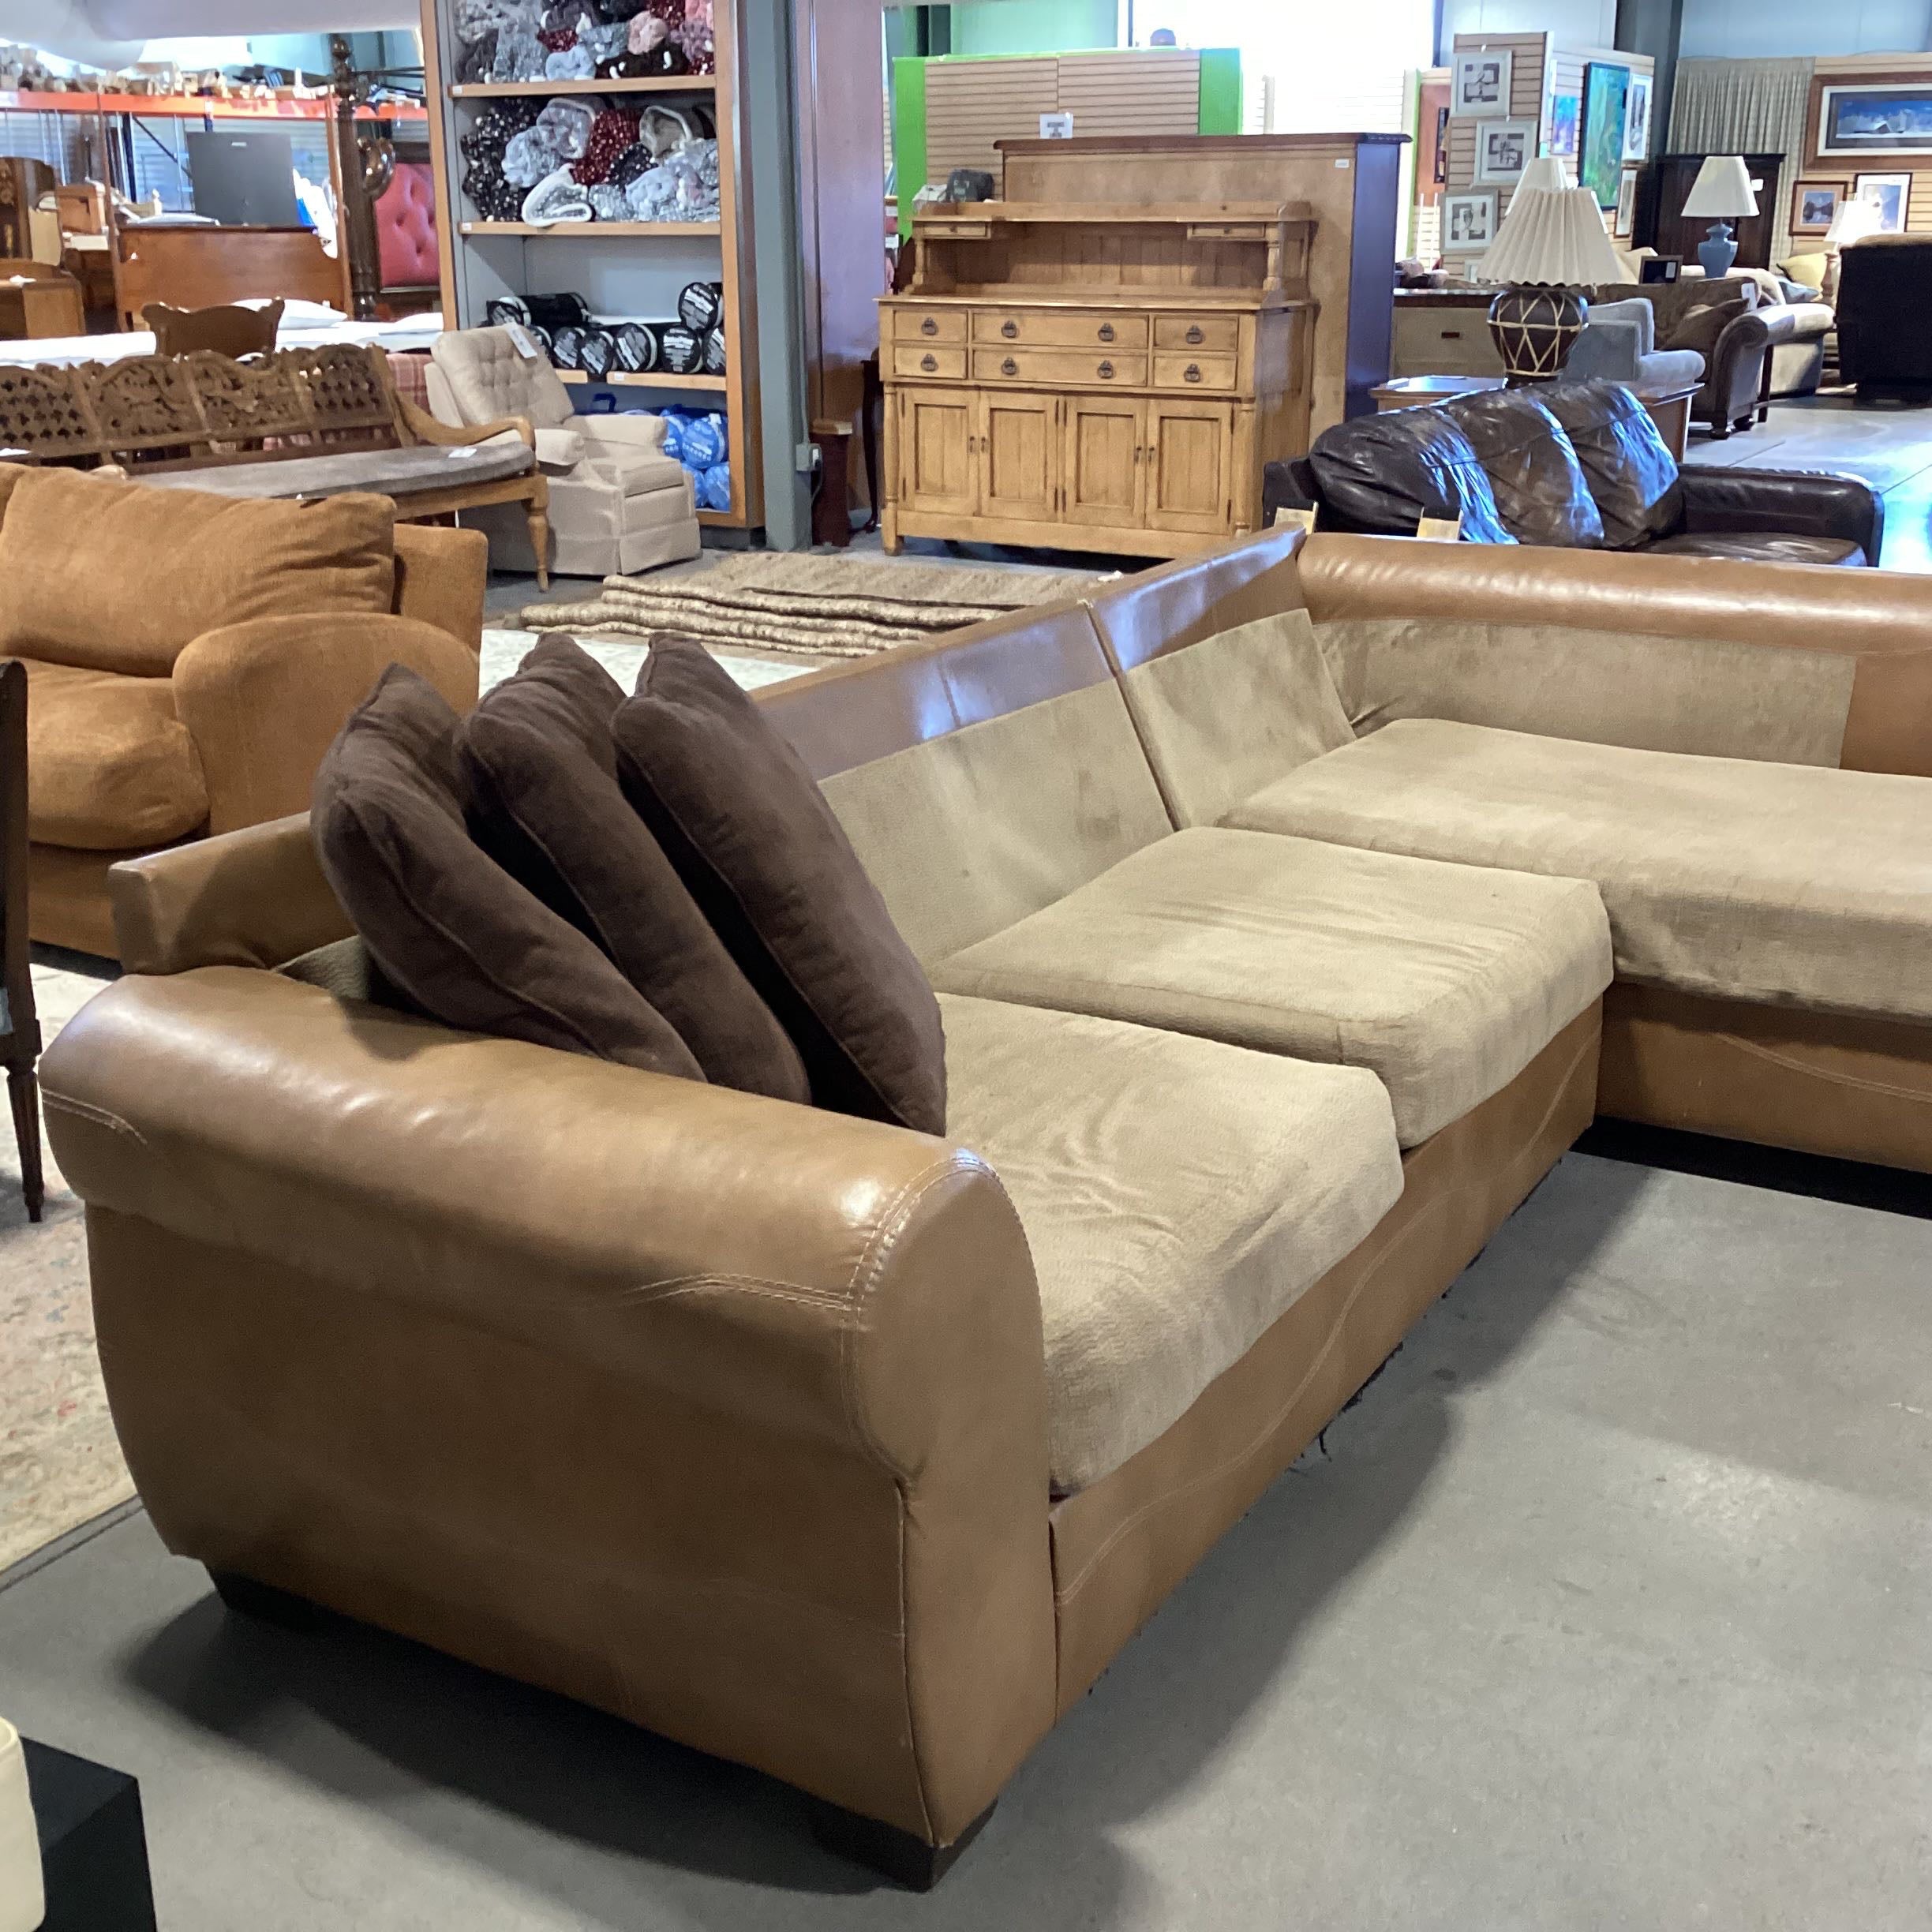 Leather Upholstered Golden Brown 2 Piece with Chaise Sectional